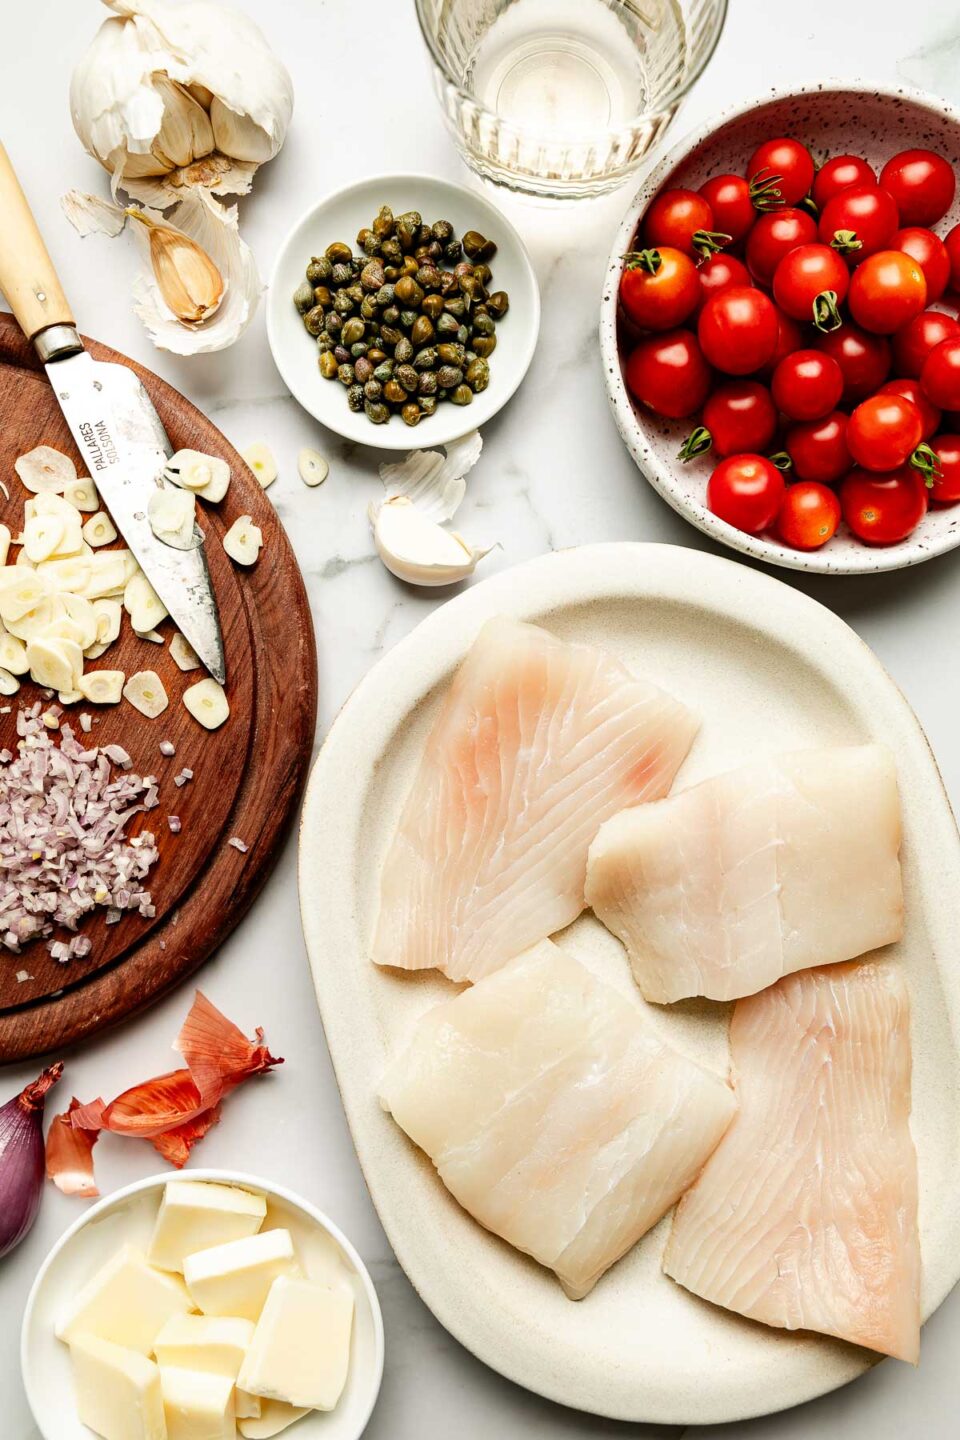 Ingredients are displayed on a white marbled surface: a stoneware dish of raw cod filets, a bowl of cherry tomatoes, sliced butter, garlic, capers and shallot.